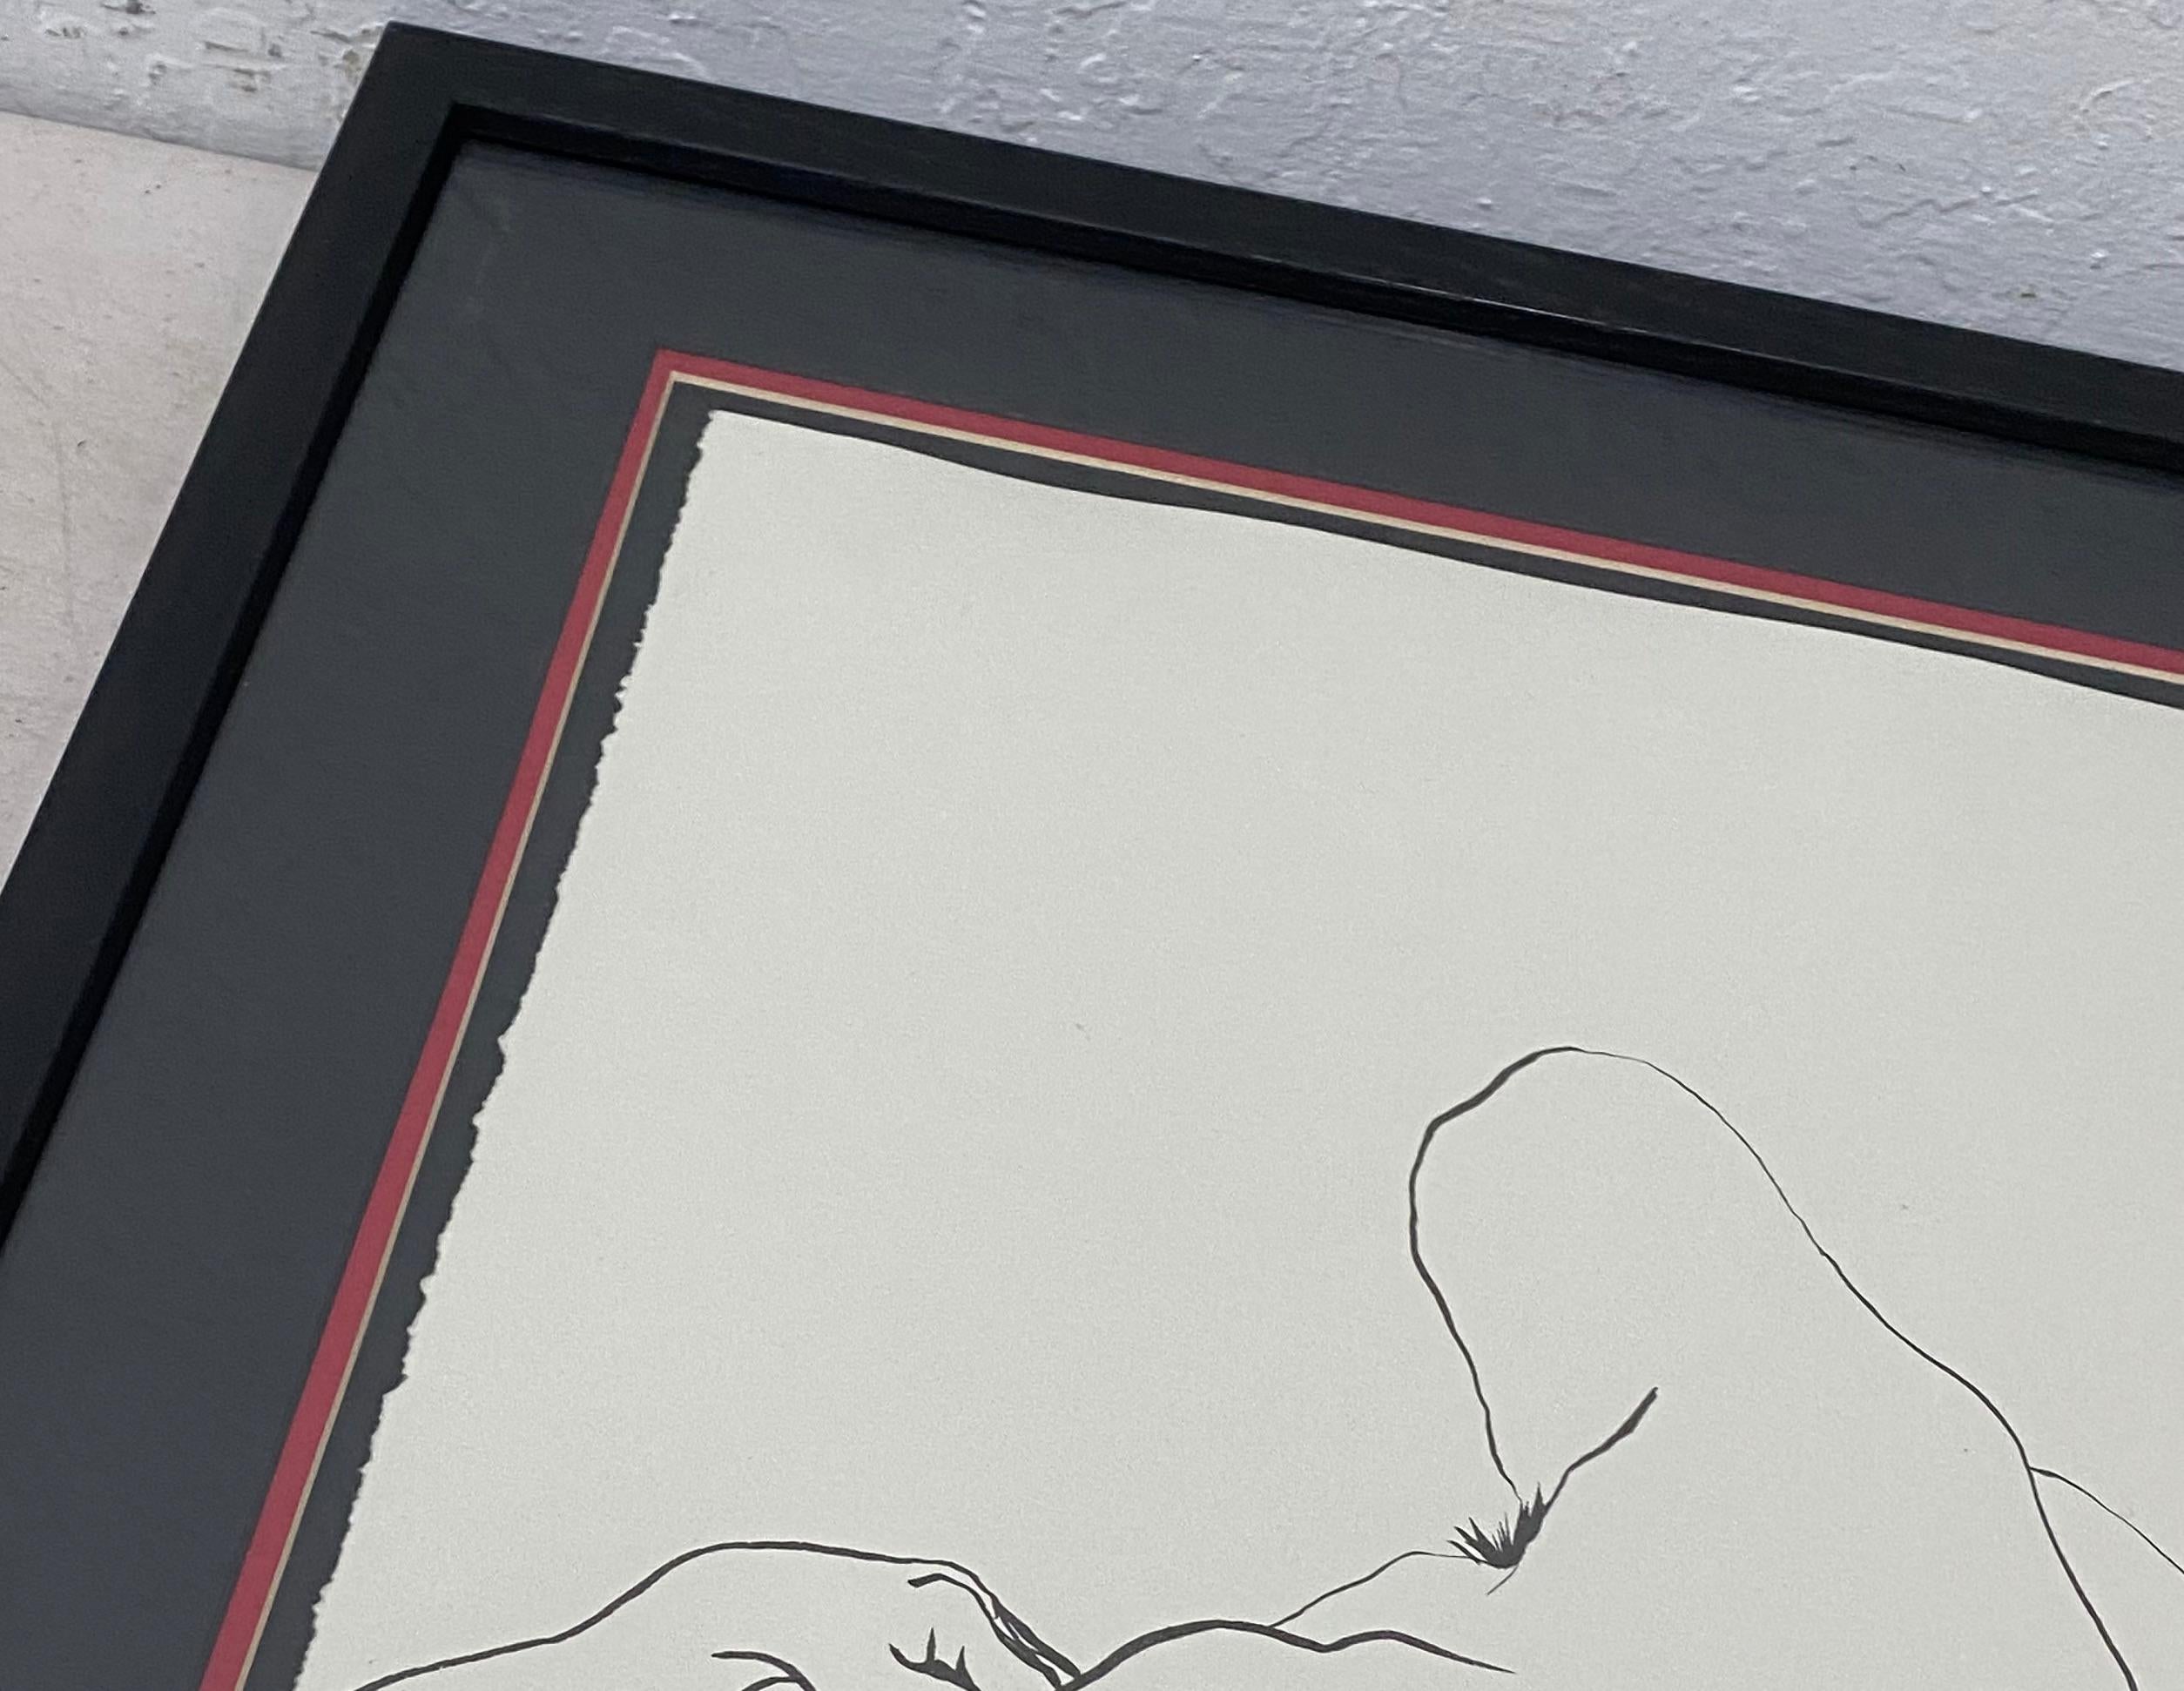 Jody Keane Reclining Nude Original Pen and Ink Drawing 20th c. For Sale 4